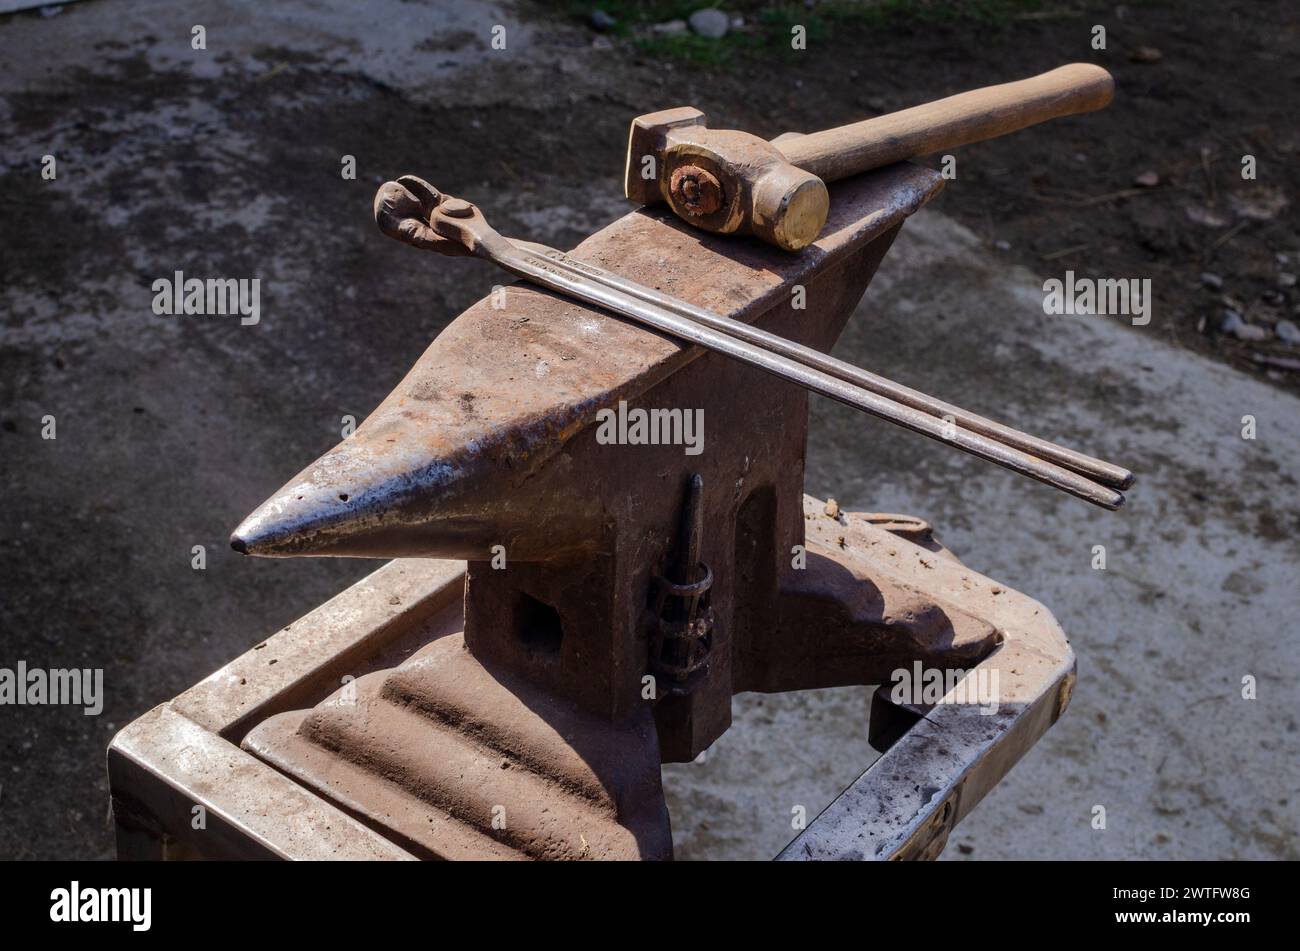 the blacksmith's anvil and tools, iron work, horseshoes, file pliers, hand tools Stock Photo